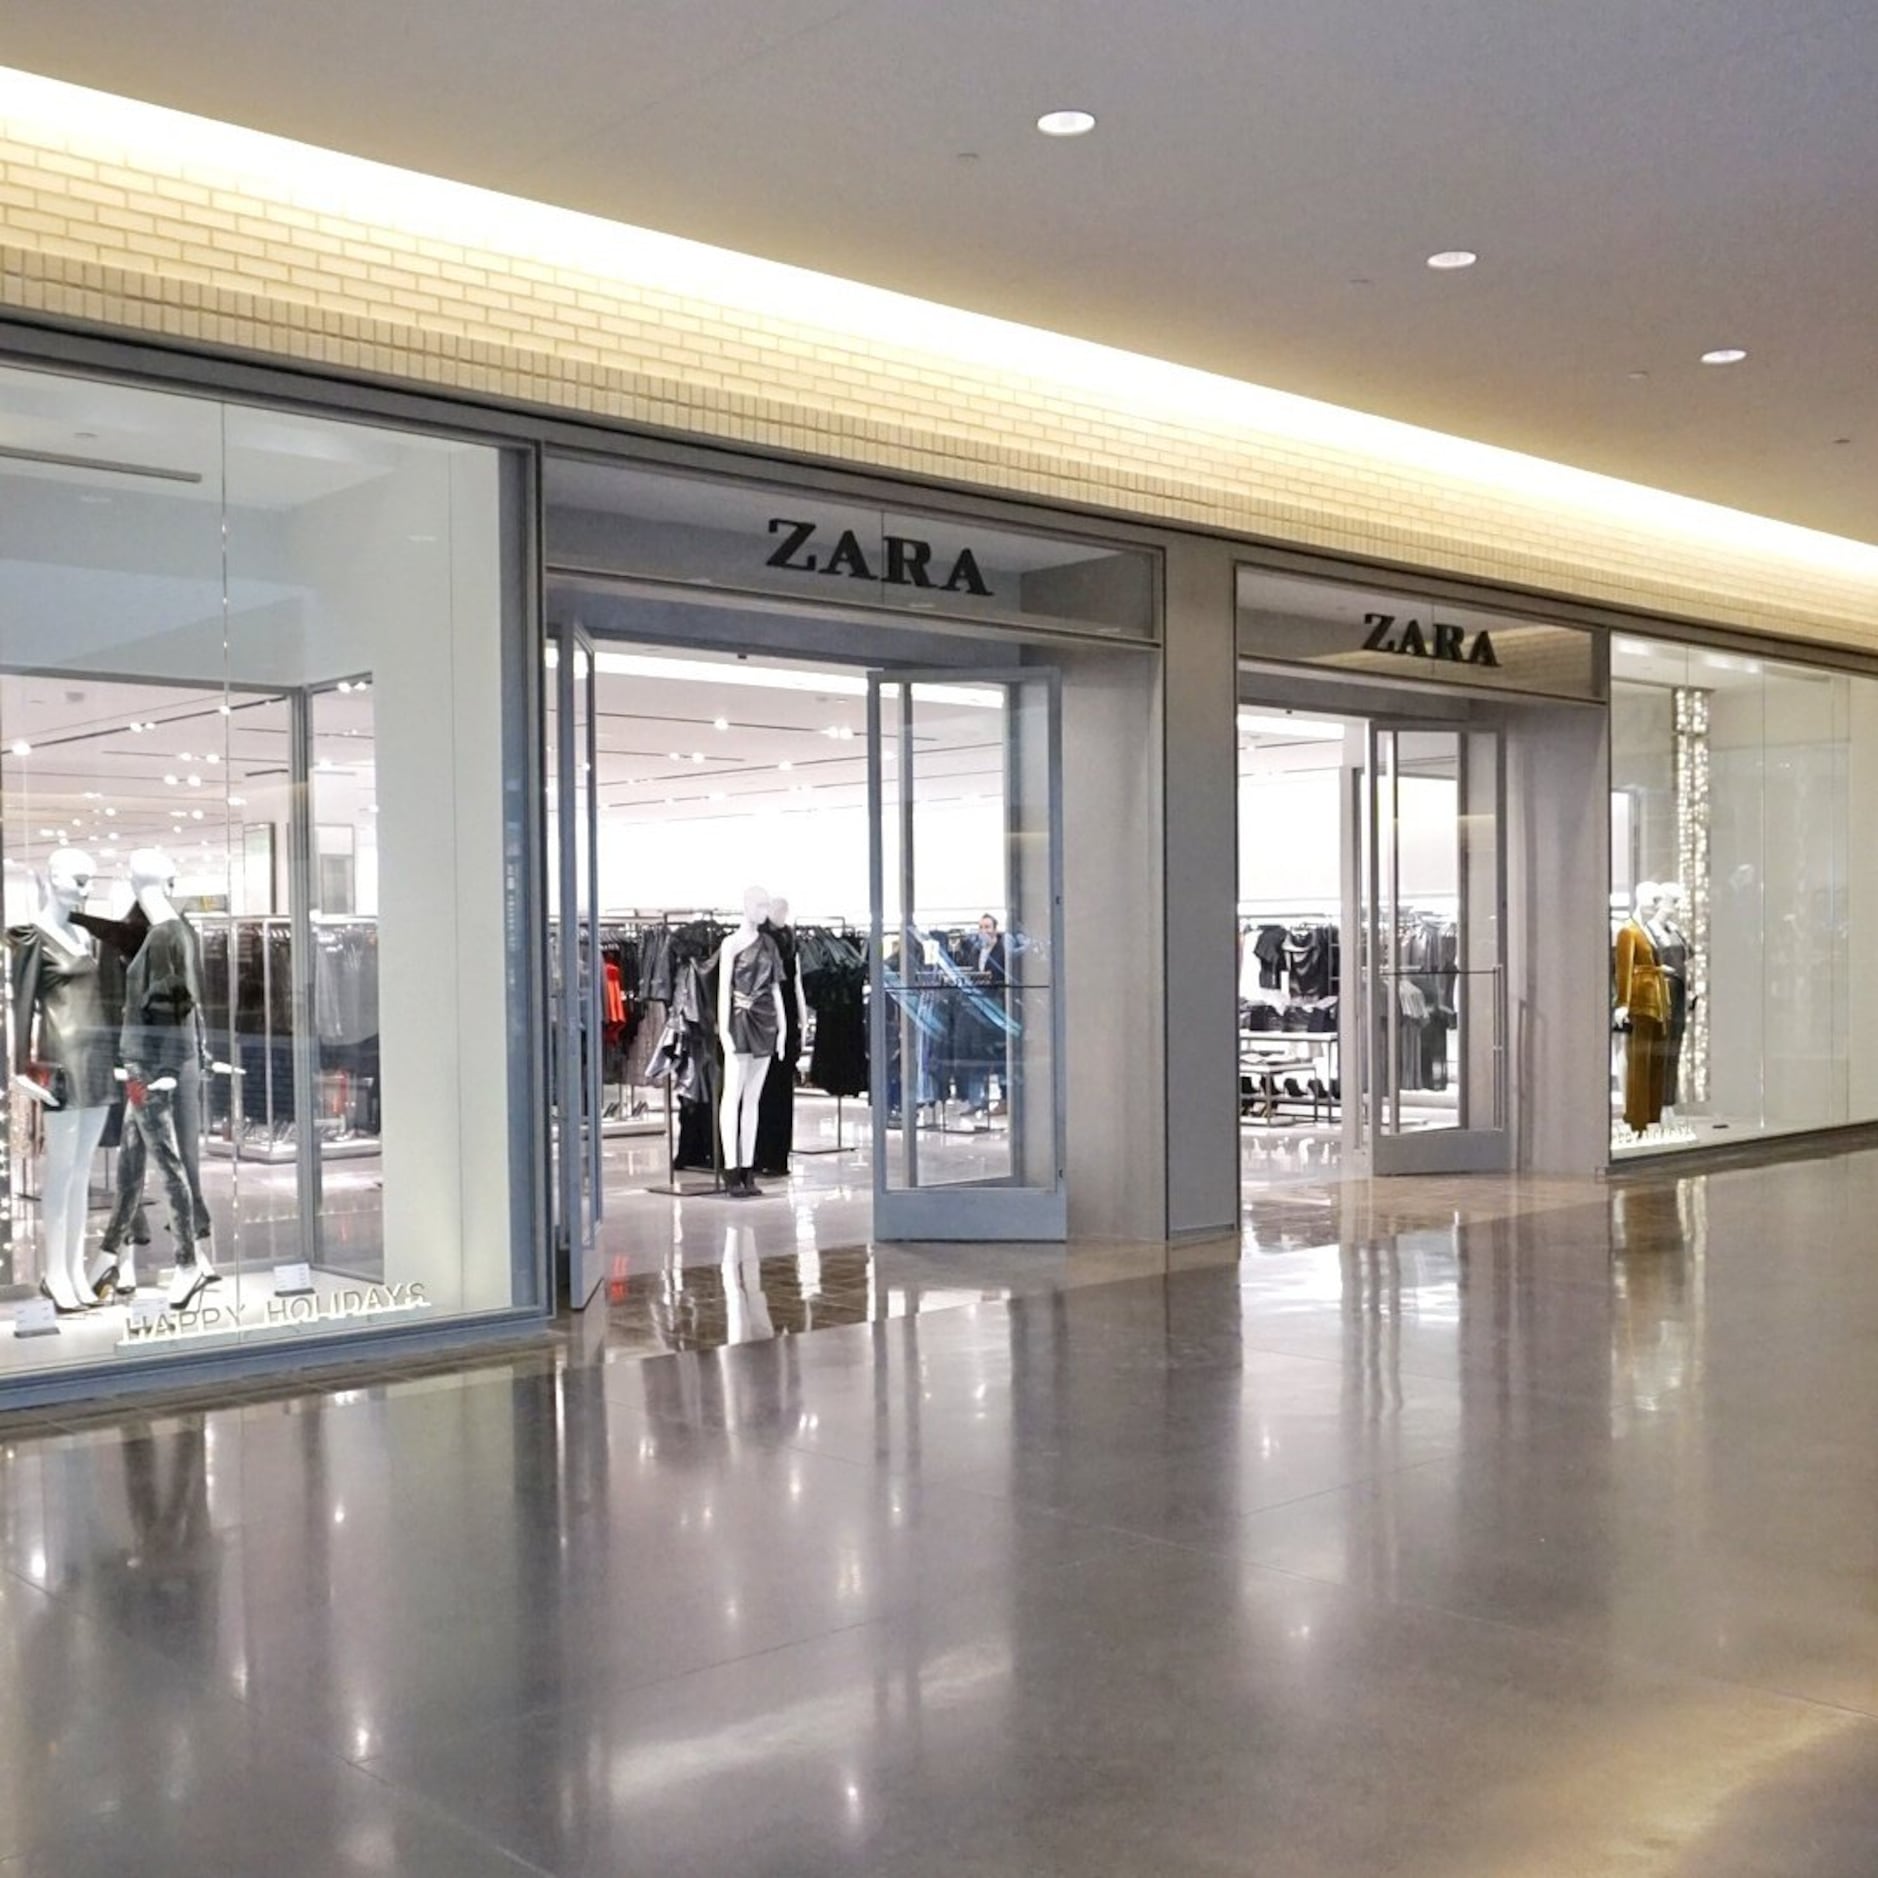 Retail Roundup: New Med Spas and Gucci's Sprawling NorthPark Store